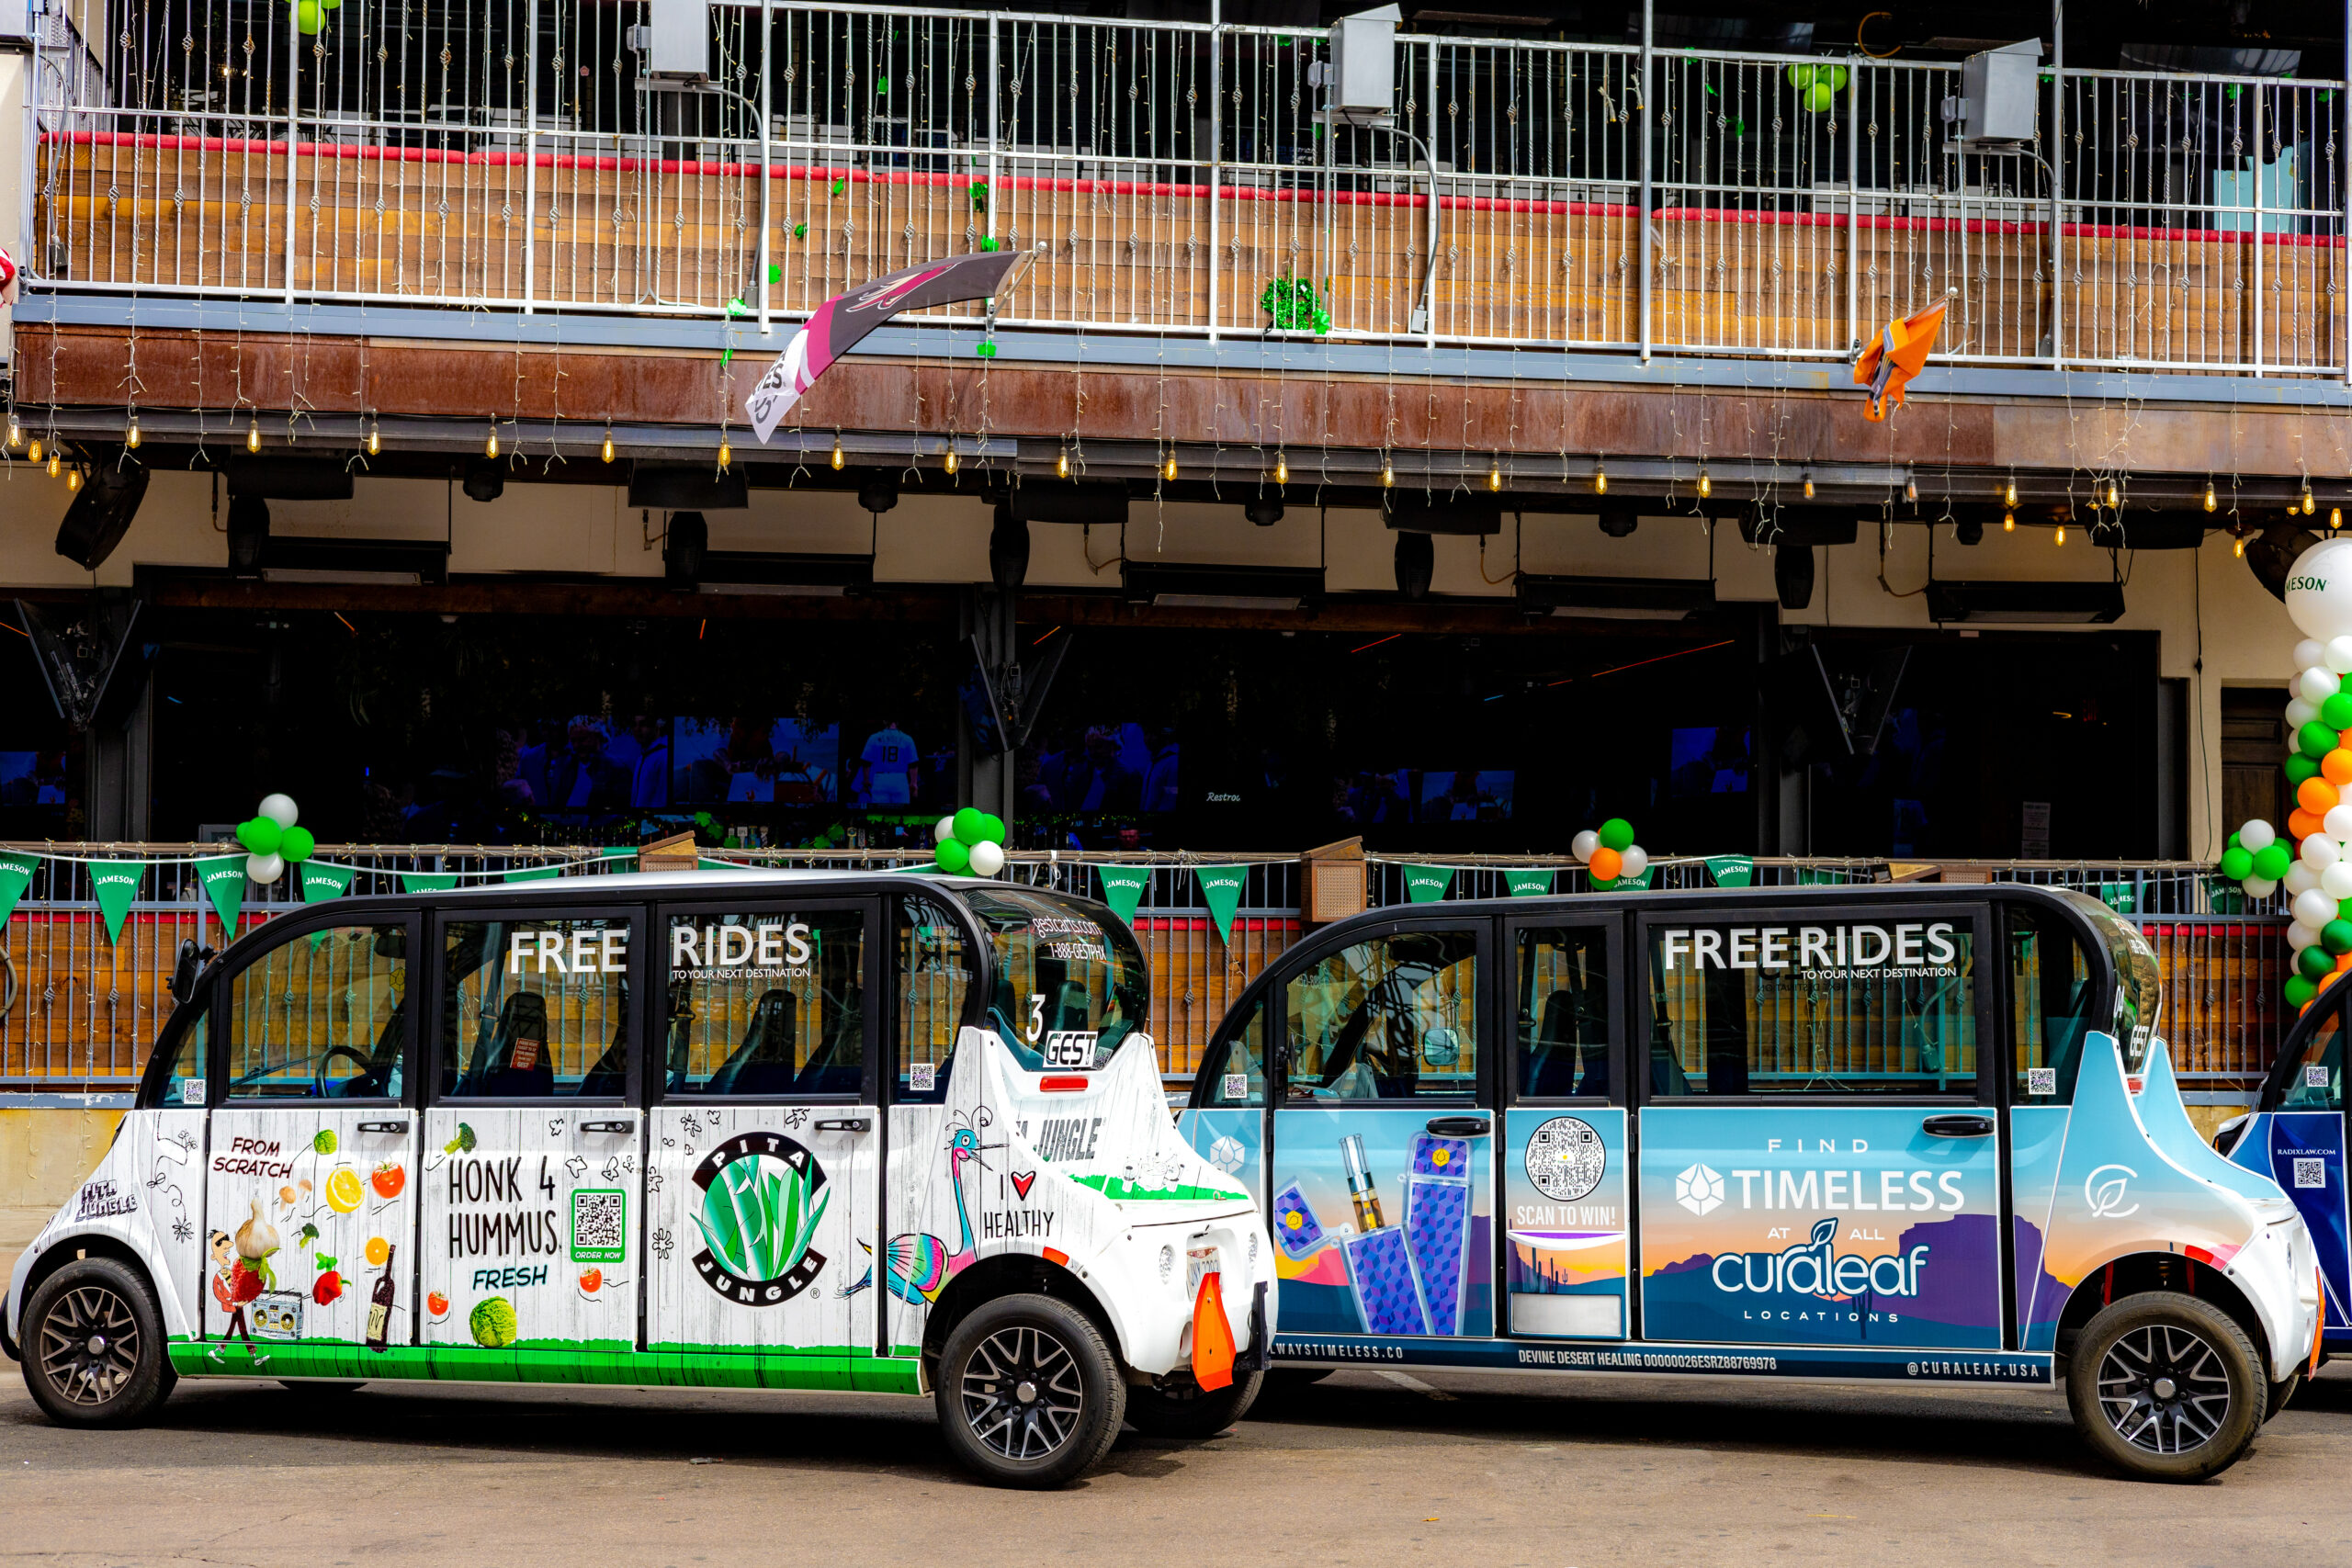 radix law partner helps launch ride-share carts in scottsdale ahead of super bowl lvii